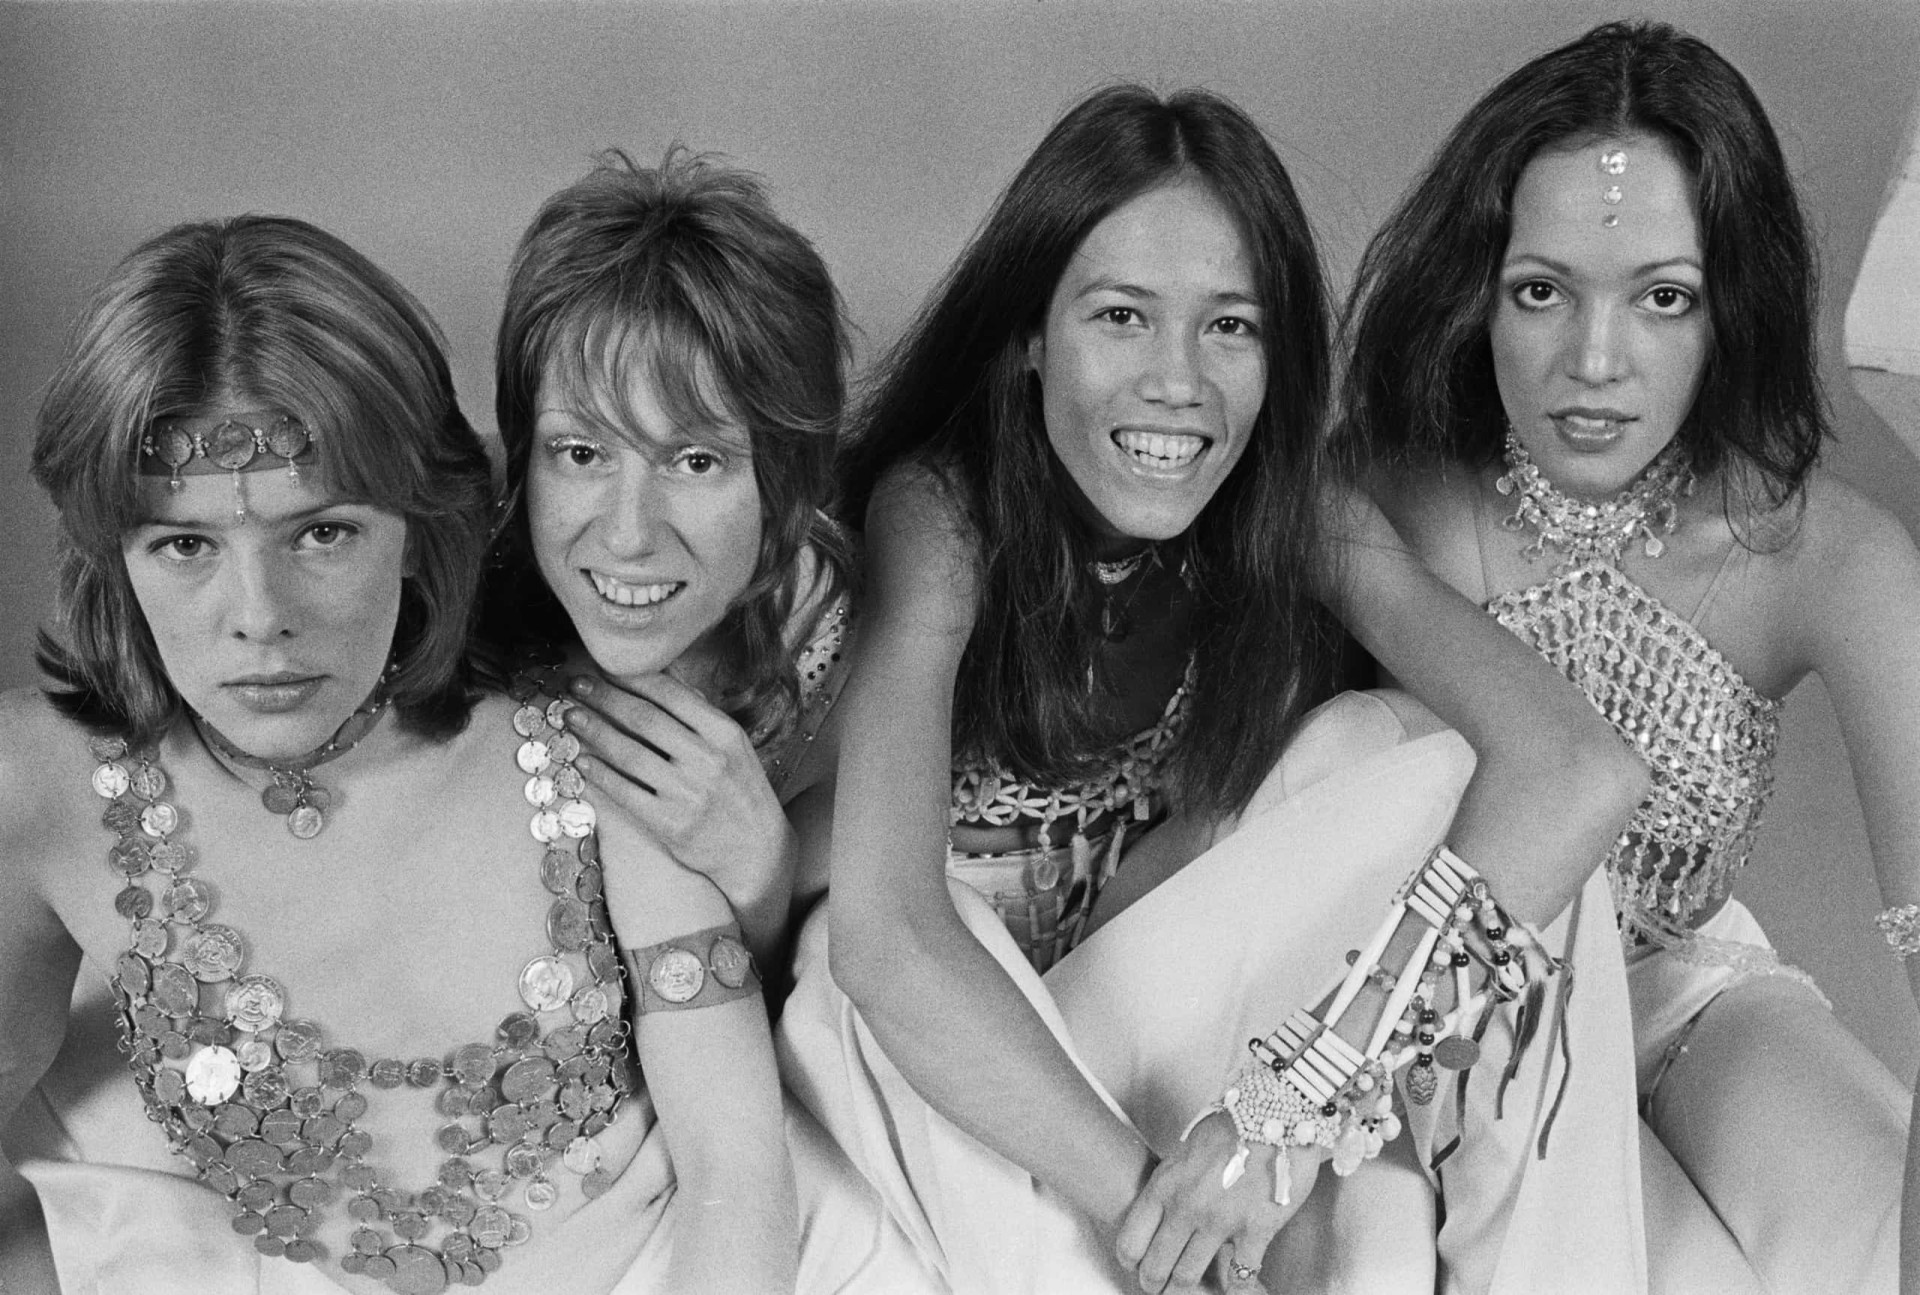 <p>One of the first all-female rock bands, Fanny—made up of drummer Alice de Buhr, keyboard player Nickey Barclay, guitarist June Millington and her sister, bassist Jean Millington—were active in the early to mid-1970s and pioneered the way for subsequent all-female musical outfits. Their cover of the Beatles' 'Hey Bulldog' is unusual in that they requested permission from John Lennon and Paul McCartney to add an extra verse into the existing song, and were given the Fab Four's blessing. The track appears on the 1972 album 'Fanny Hill.'</p><p>You may also like:<a href="https://www.starsinsider.com/n/497540?utm_source=msn.com&utm_medium=display&utm_campaign=referral_description&utm_content=603256en-my"> The radioactive animals of Chernobyl</a></p>